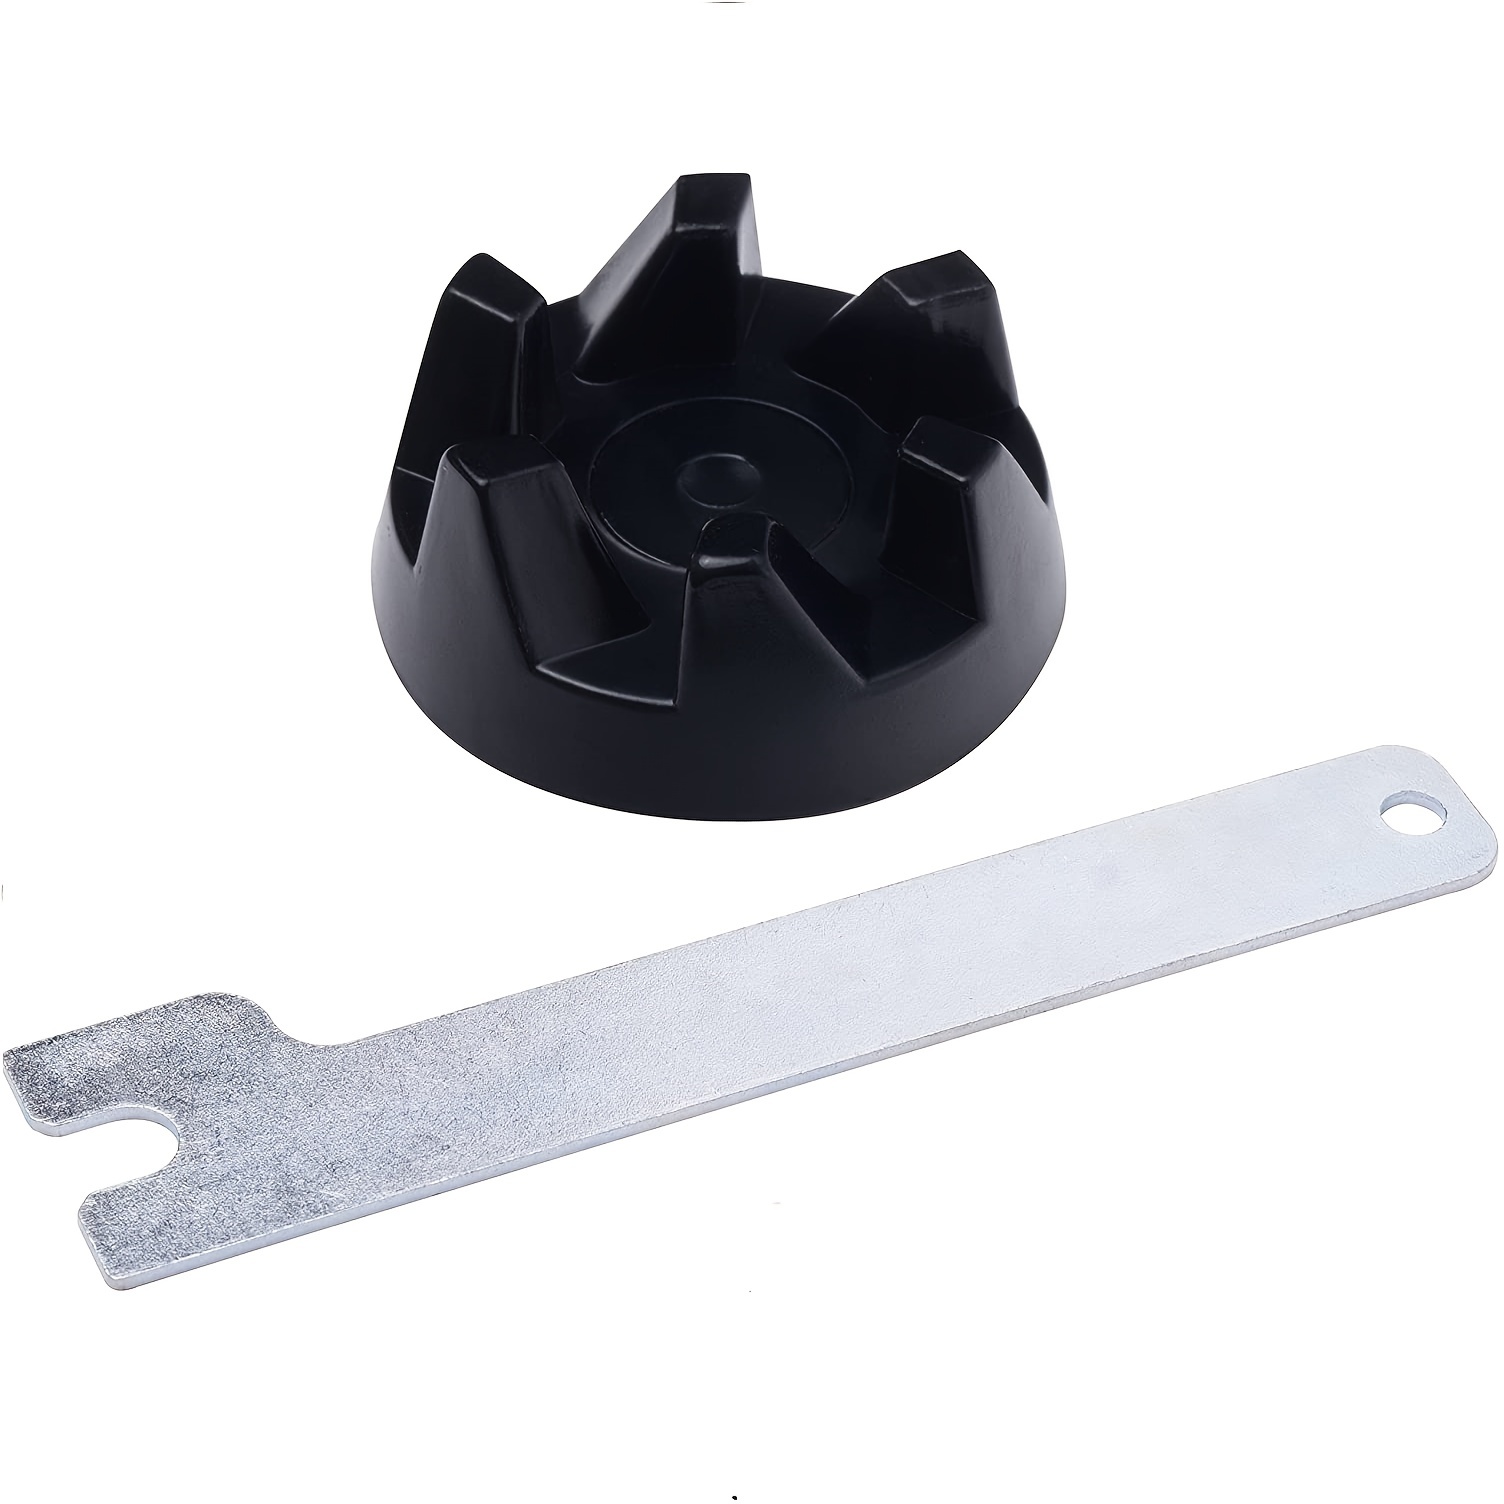  9704230 Blender Coupler with Spanner Kit Replacement Parts  Compatible with KitchenAid KSB5WH KSB5 KSB3 Driver : Home & Kitchen